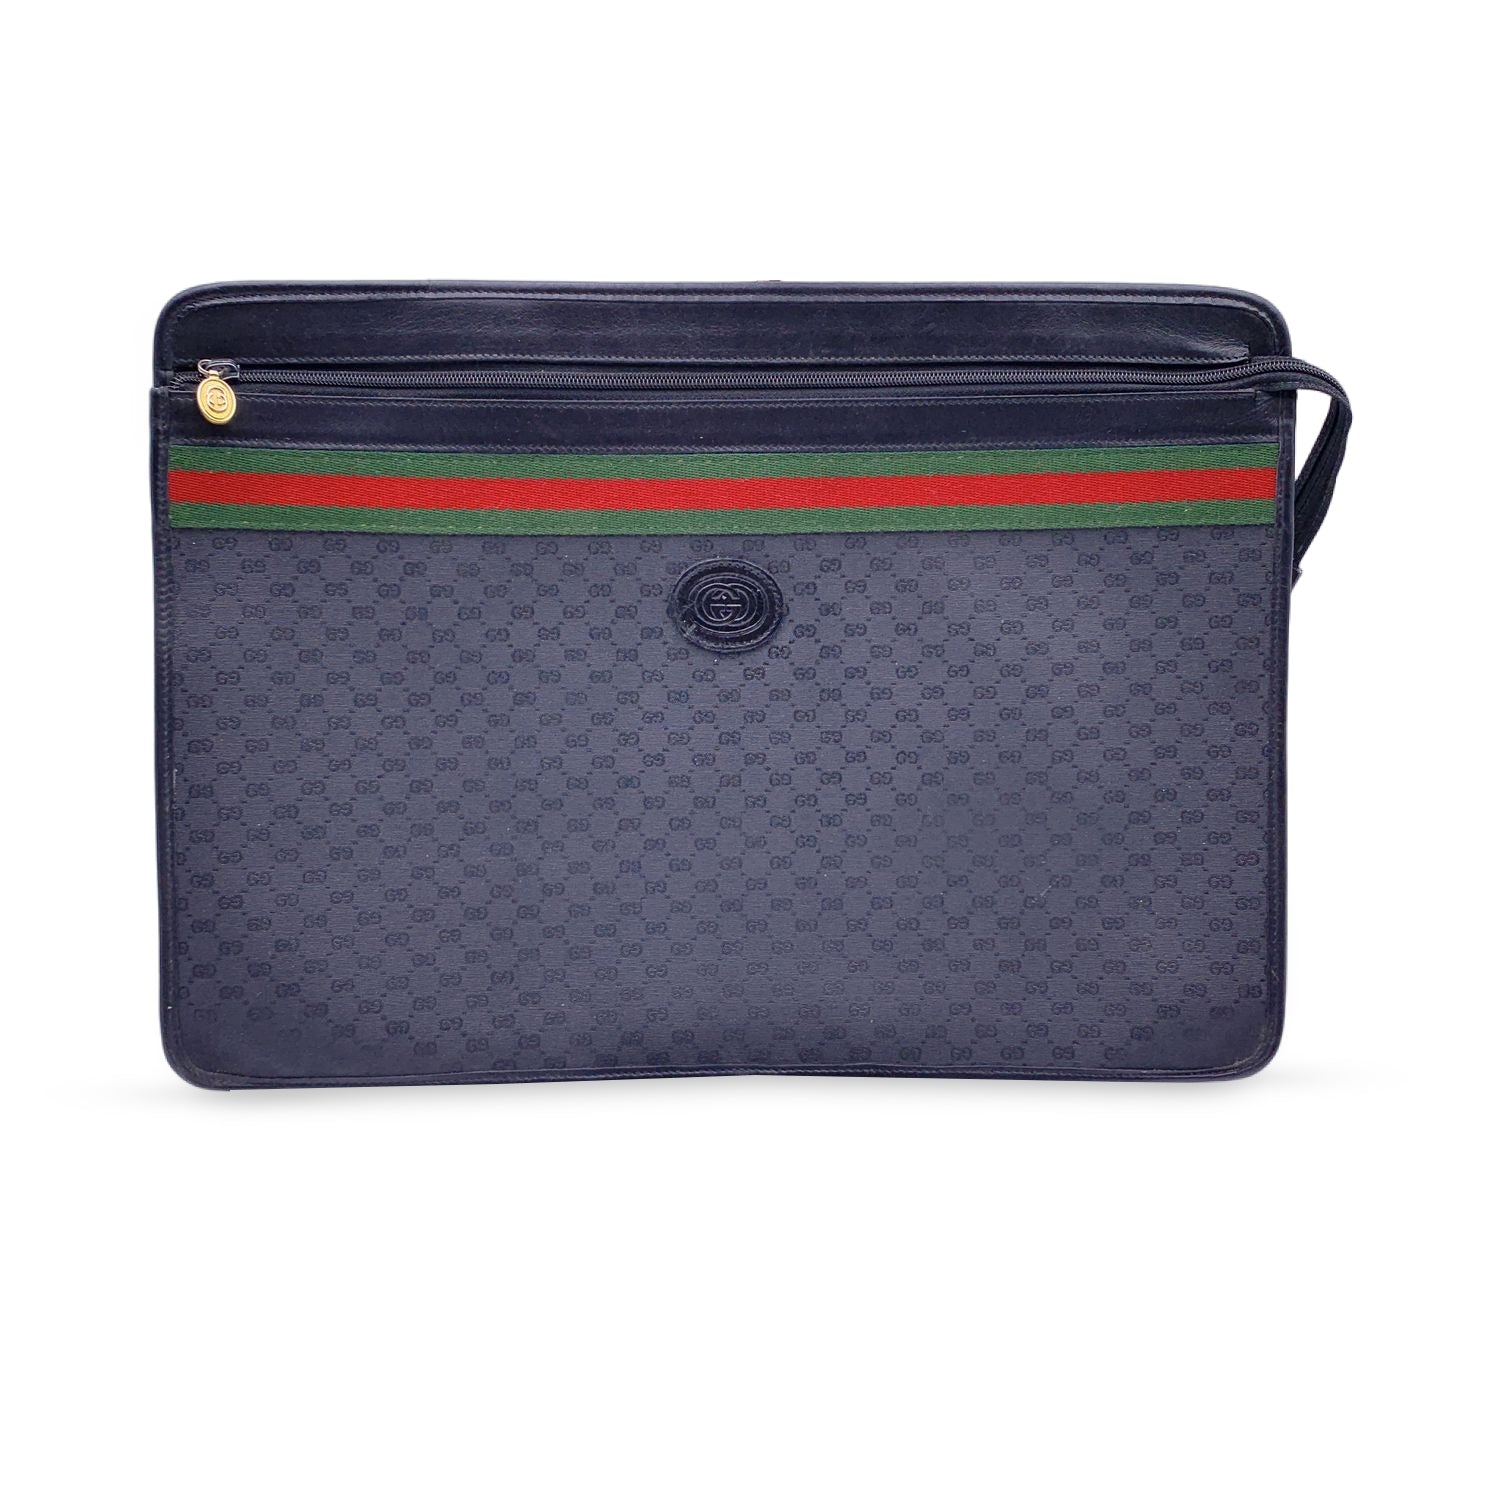 AUTHENTI-HOW: A Close look at GUCCI logos and serials – OPA Vintage